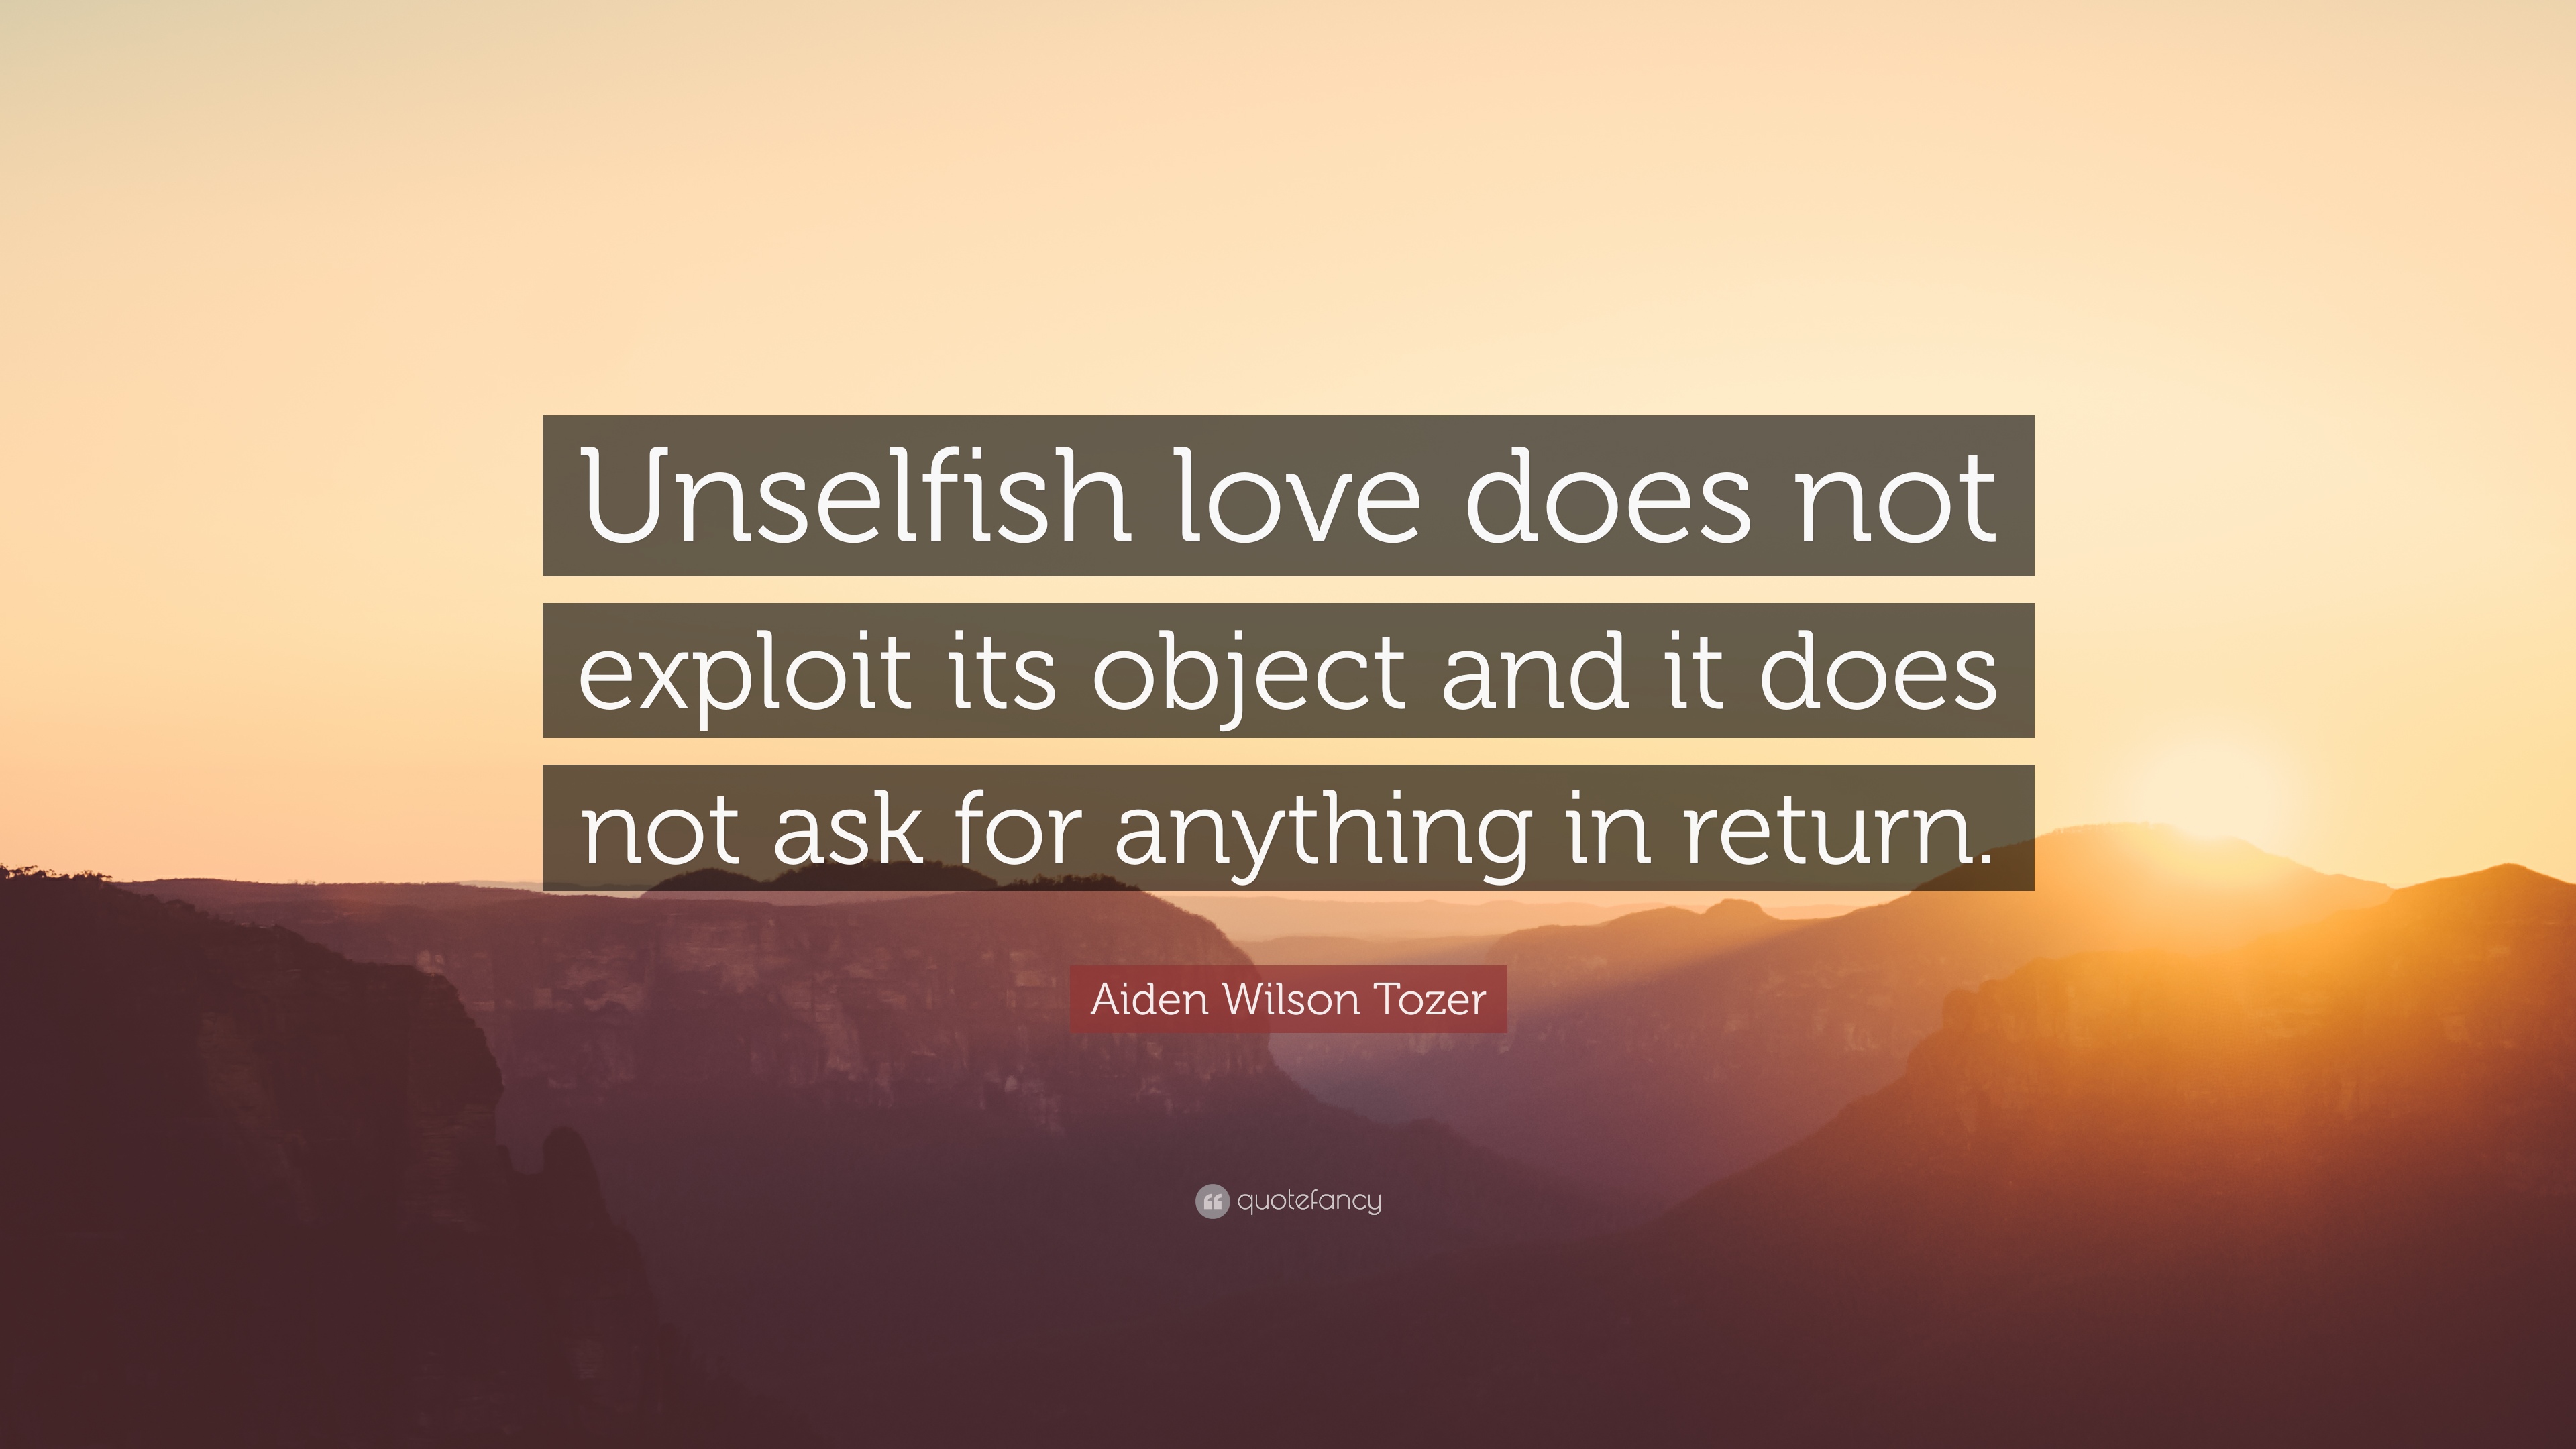 Aiden Wilson Tozer Quote: “Unselfish love does not exploit its ...